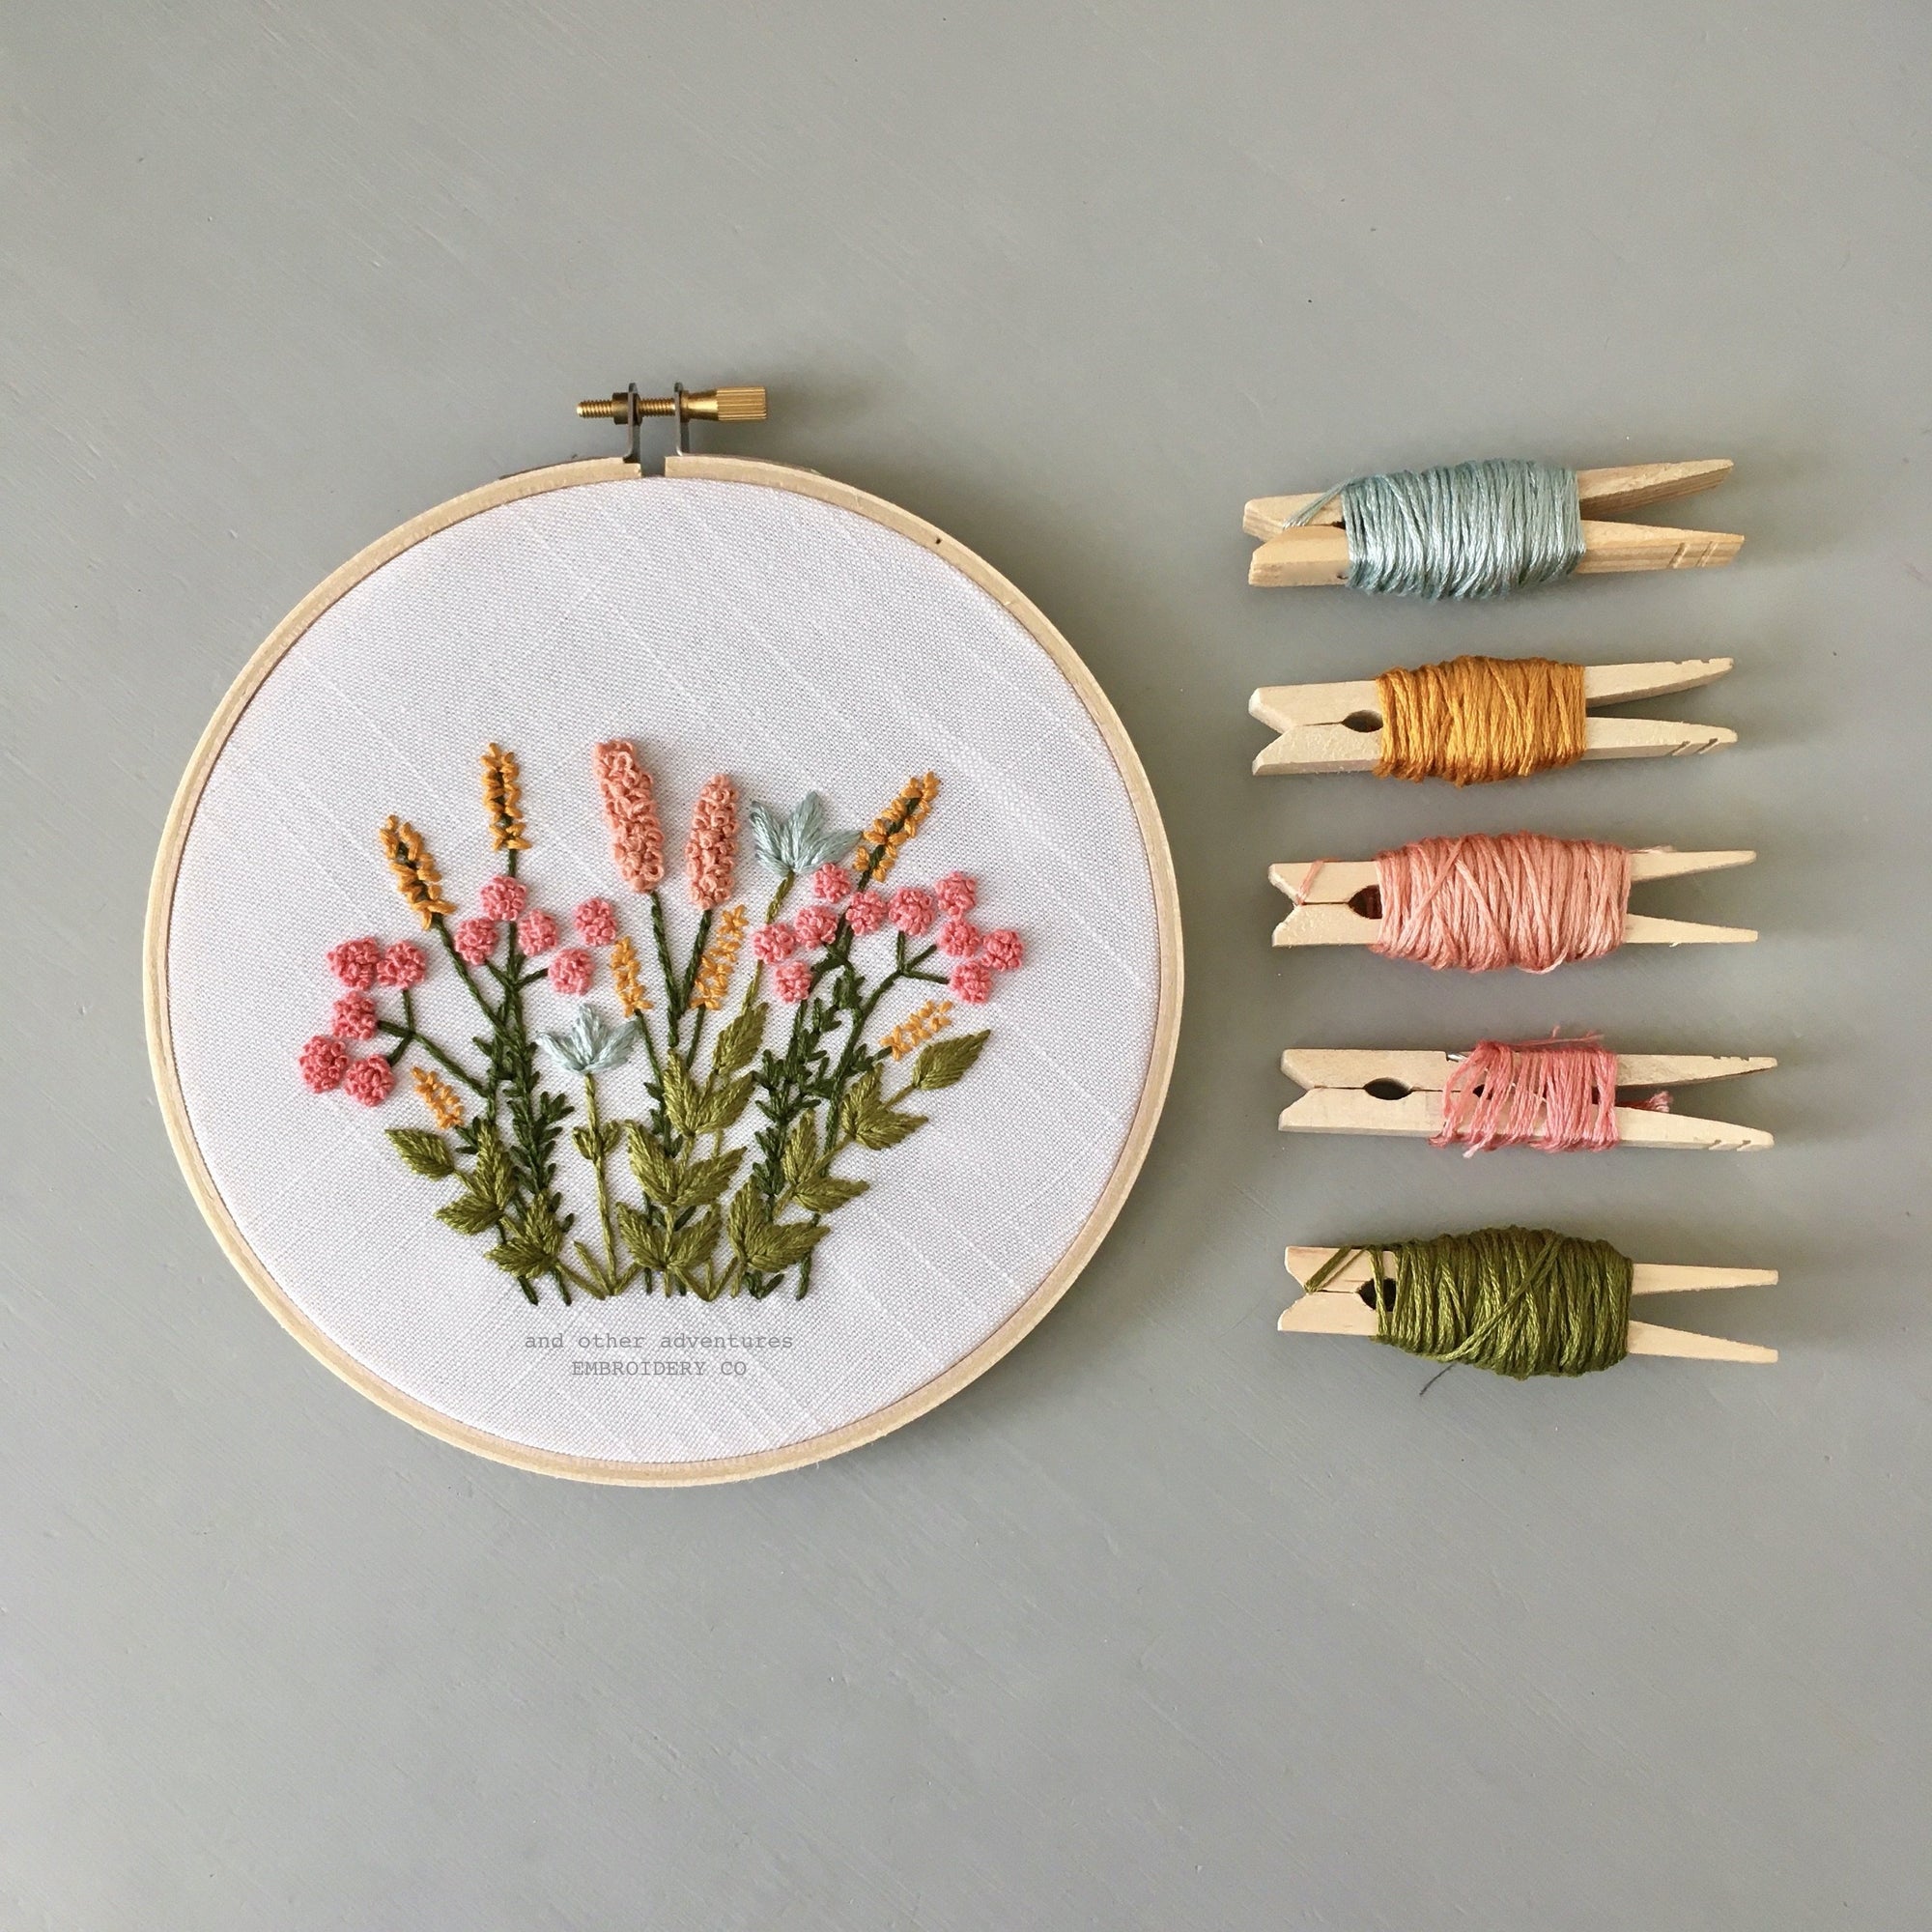 It may not be much, but it's my first embroidery design! I'm